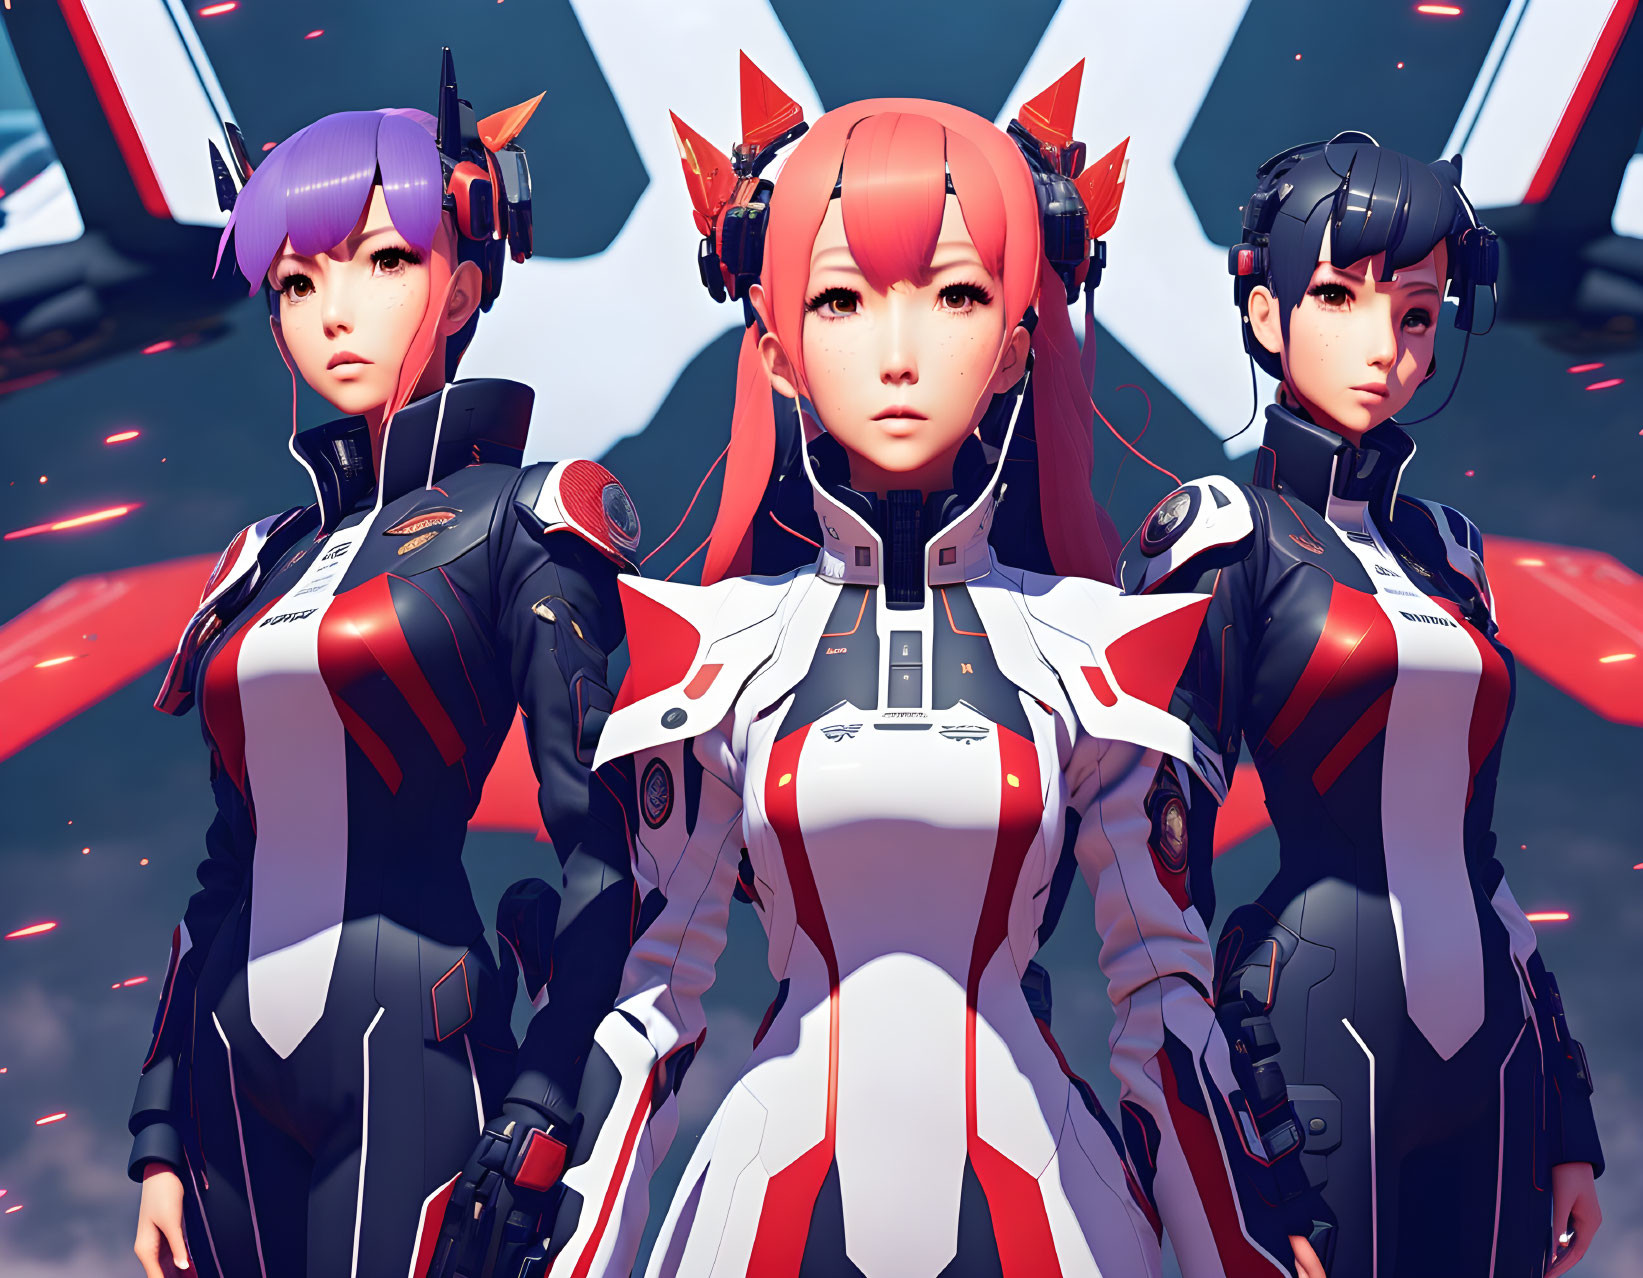 Three animated female characters in futuristic red and white outfits on abstract background